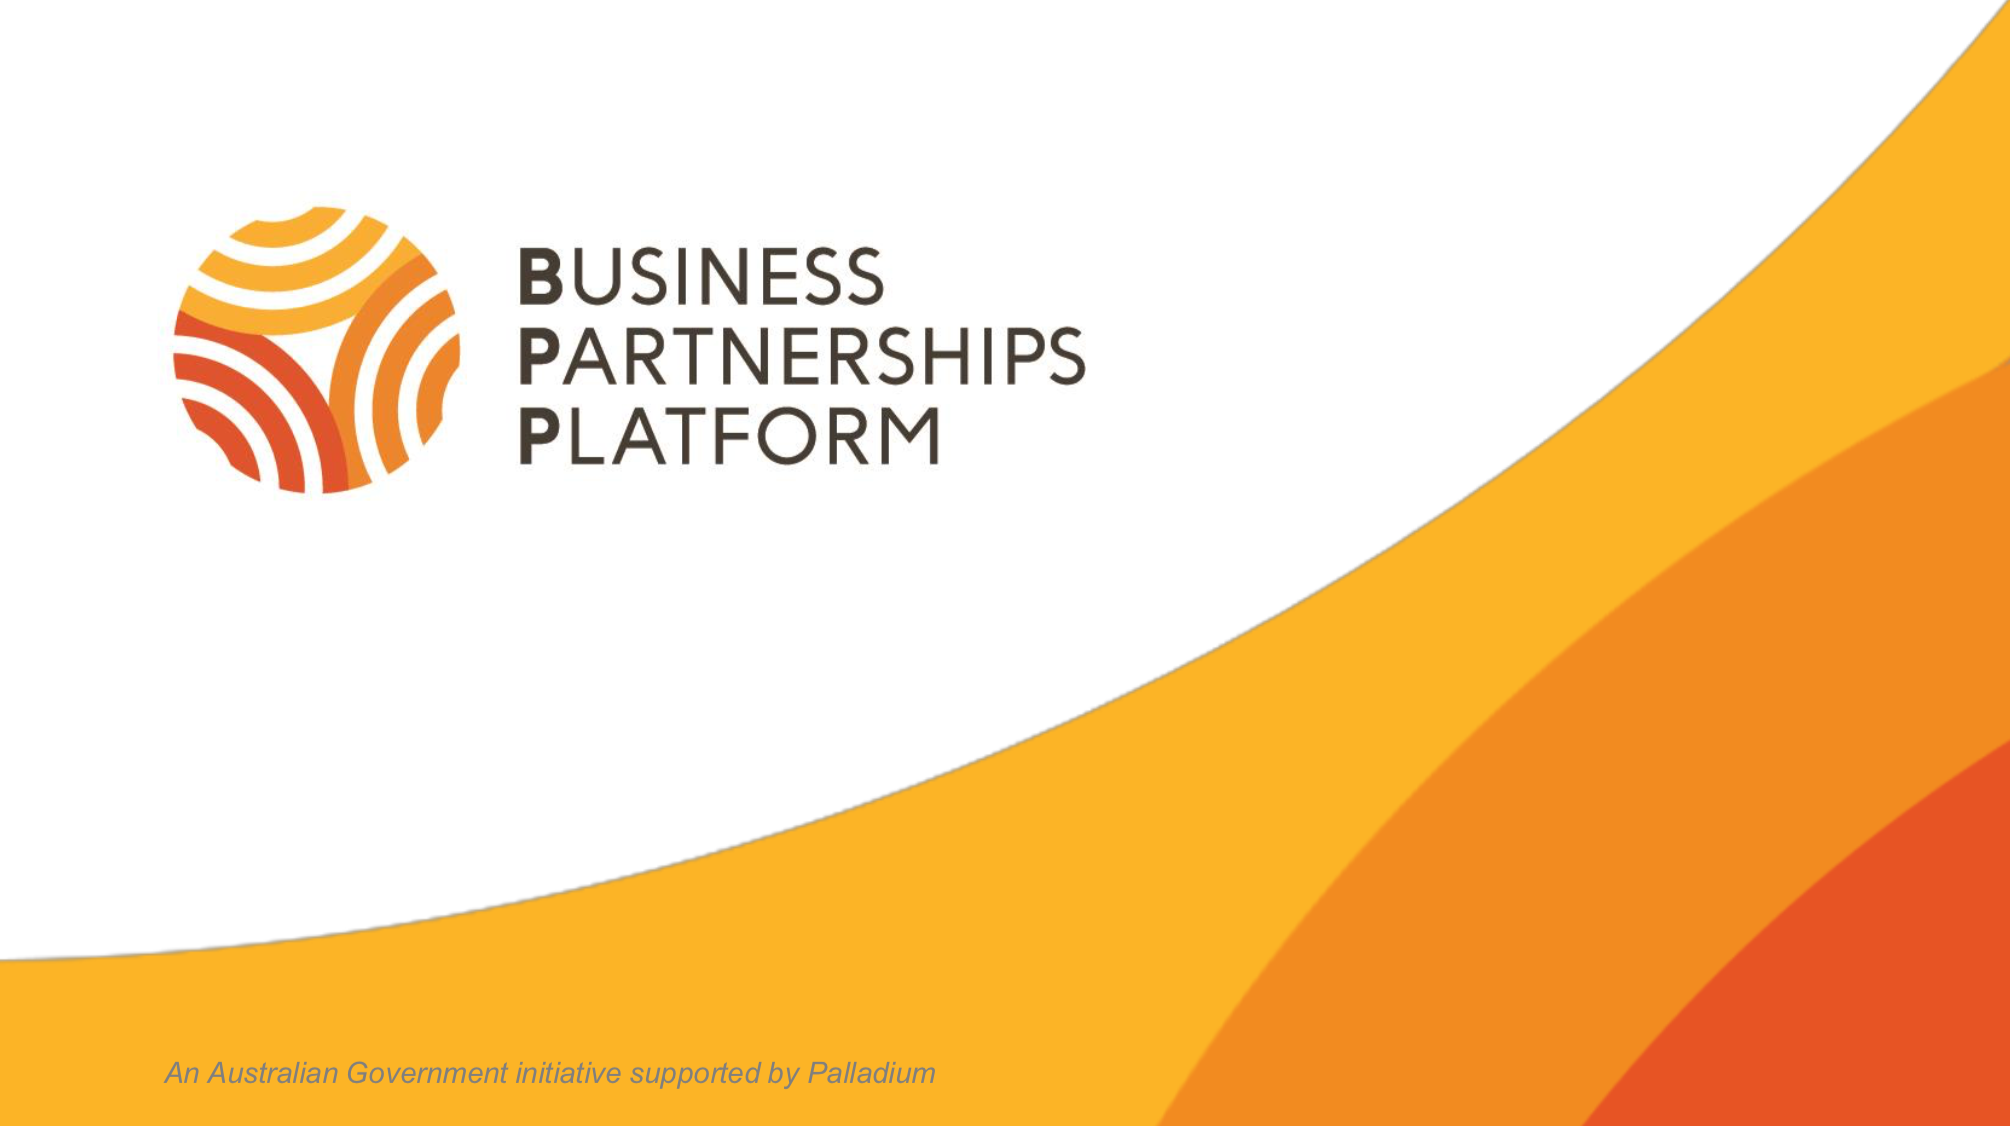 Australian Government's logo for Business Partnerships Platform, backed by Palladium, on white background with orange and yellow curved lines in corner.